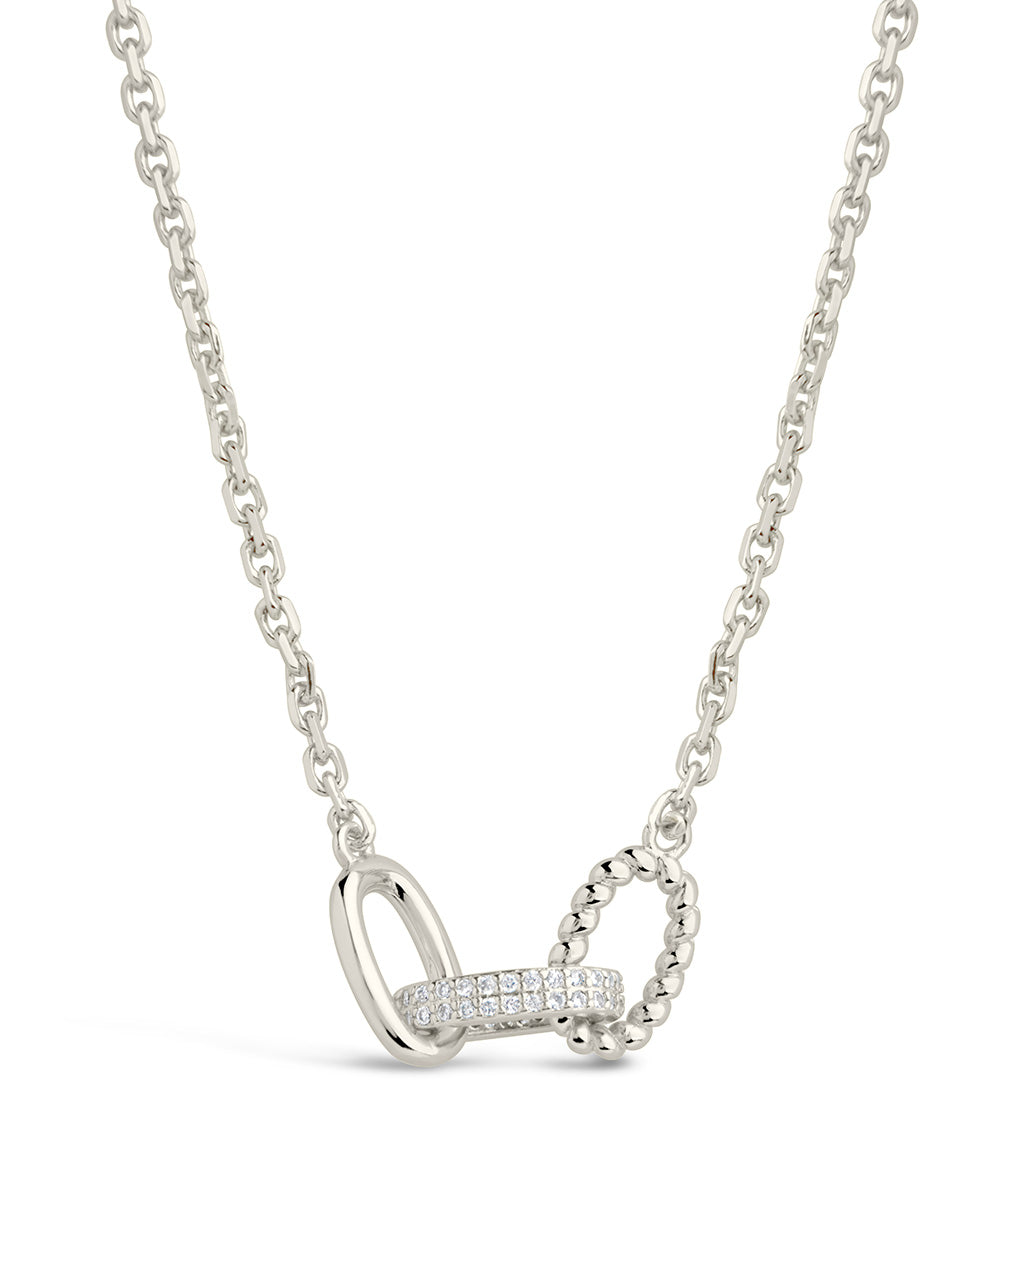 Journi Necklace Necklace Sterling Forever Silver 